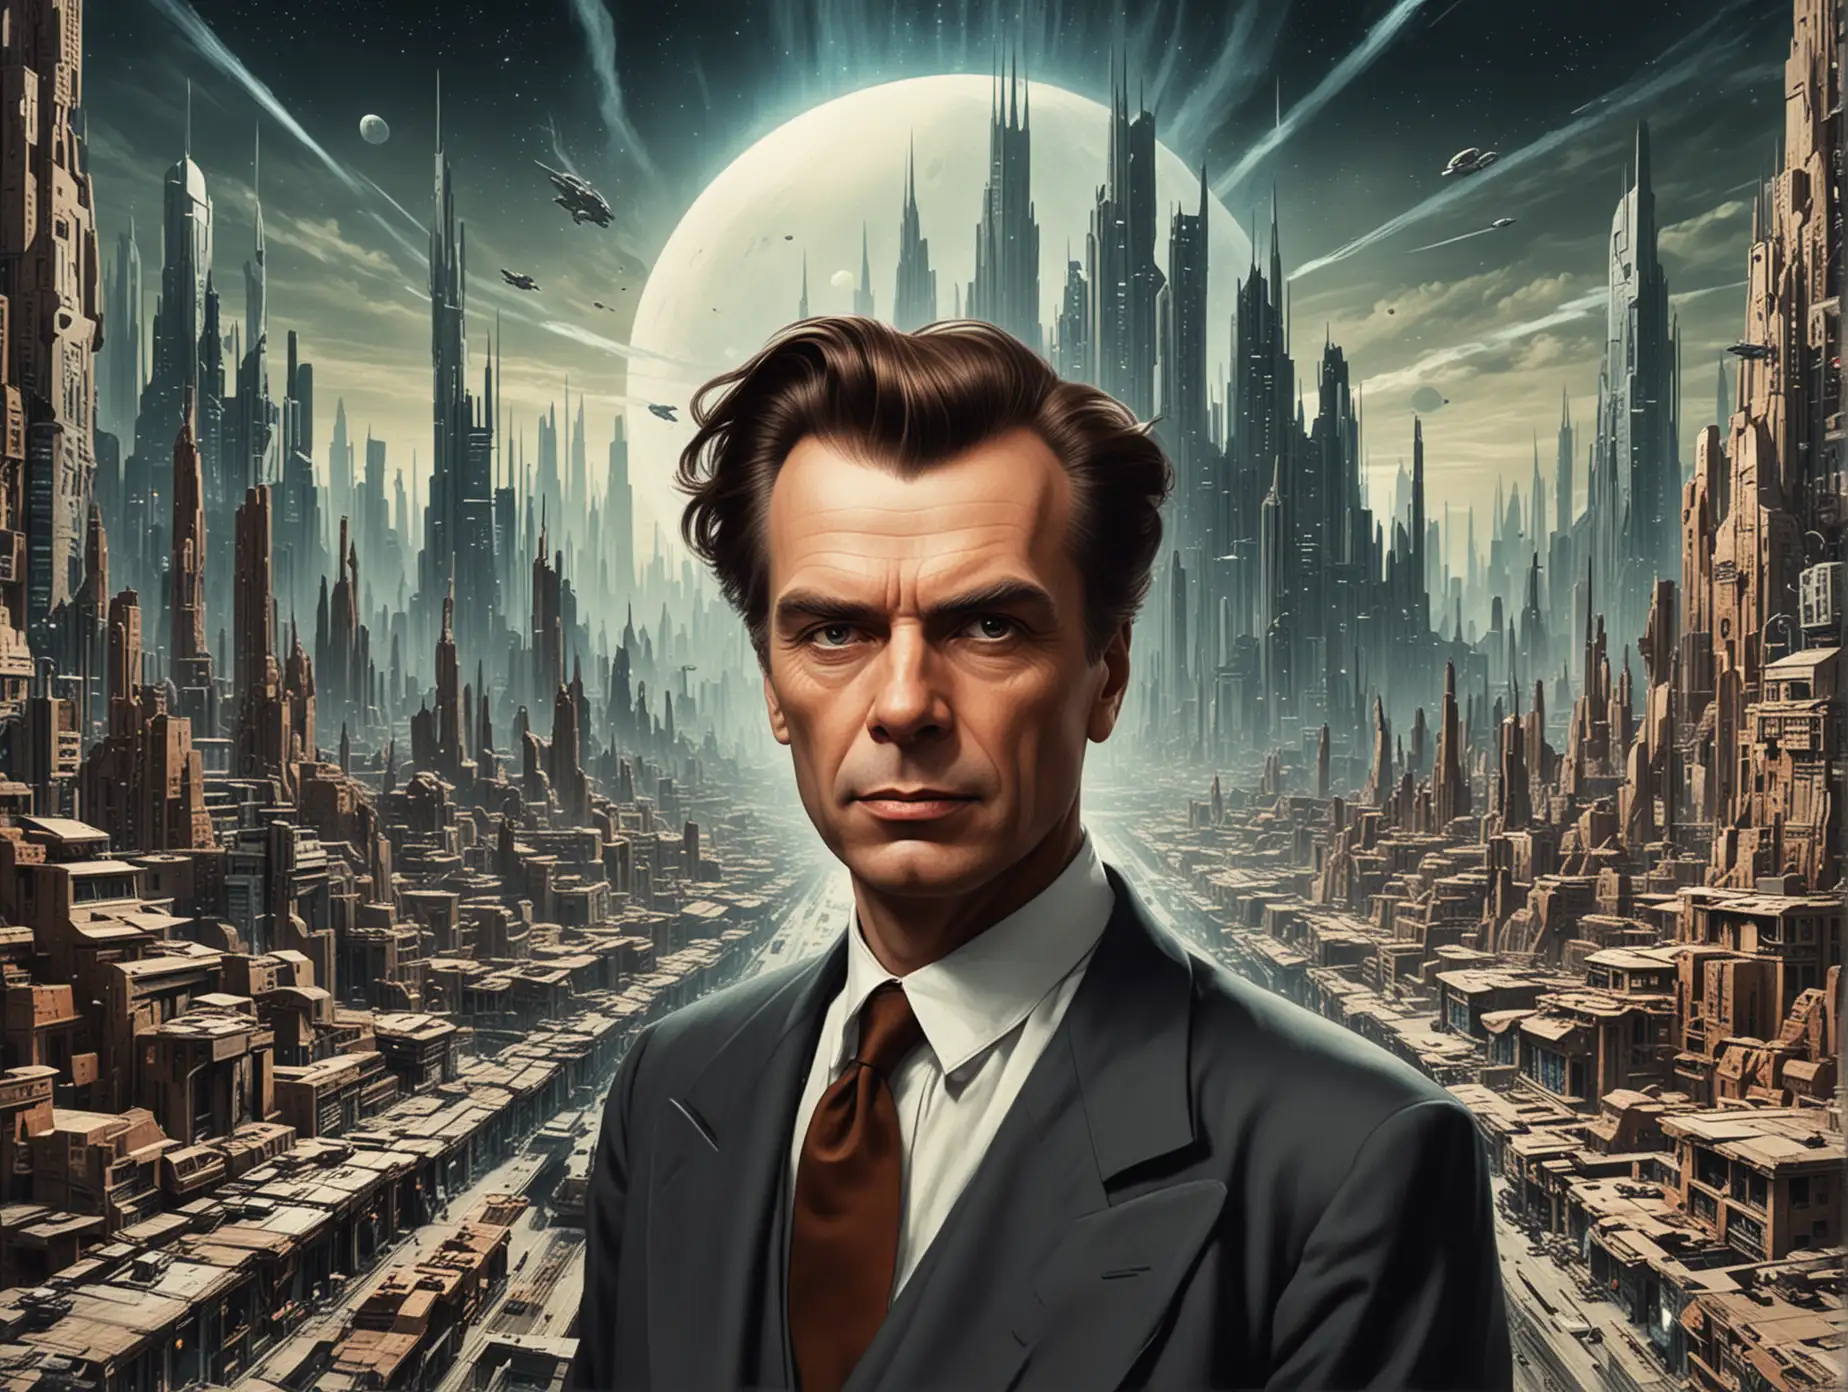 Aldous Huxley as the central image. The background is a futuristic city. 